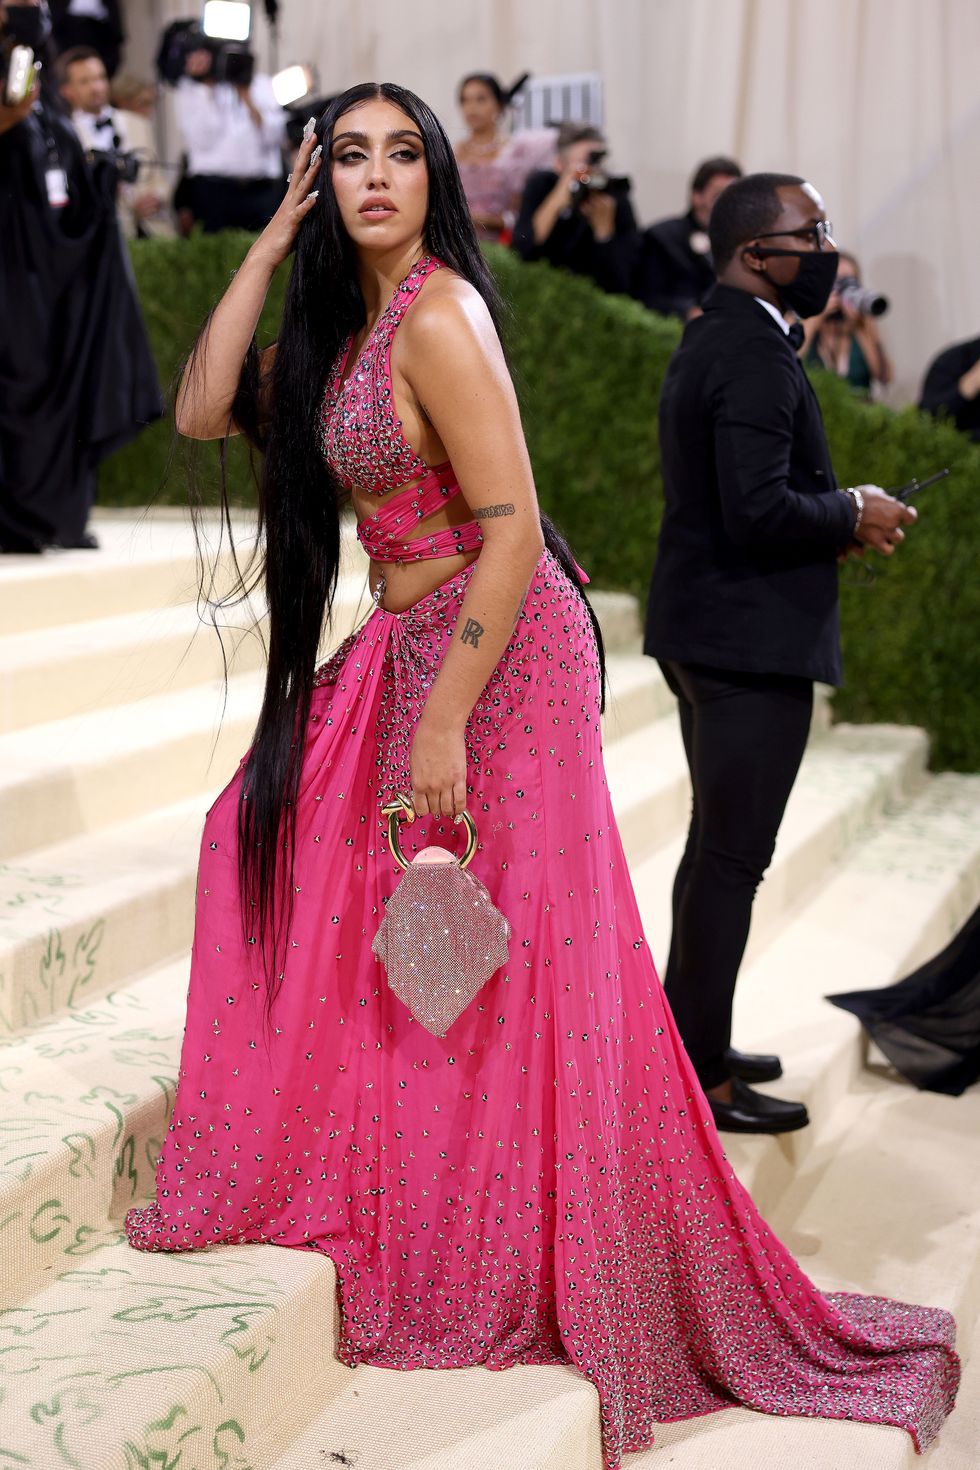 new york, new york september 13 lourdes leon attends the 2021 met gala celebrating in america a lexicon of fashion at metropolitan museum of art on september 13, 2021 in new york city photo by john shearerwireimage